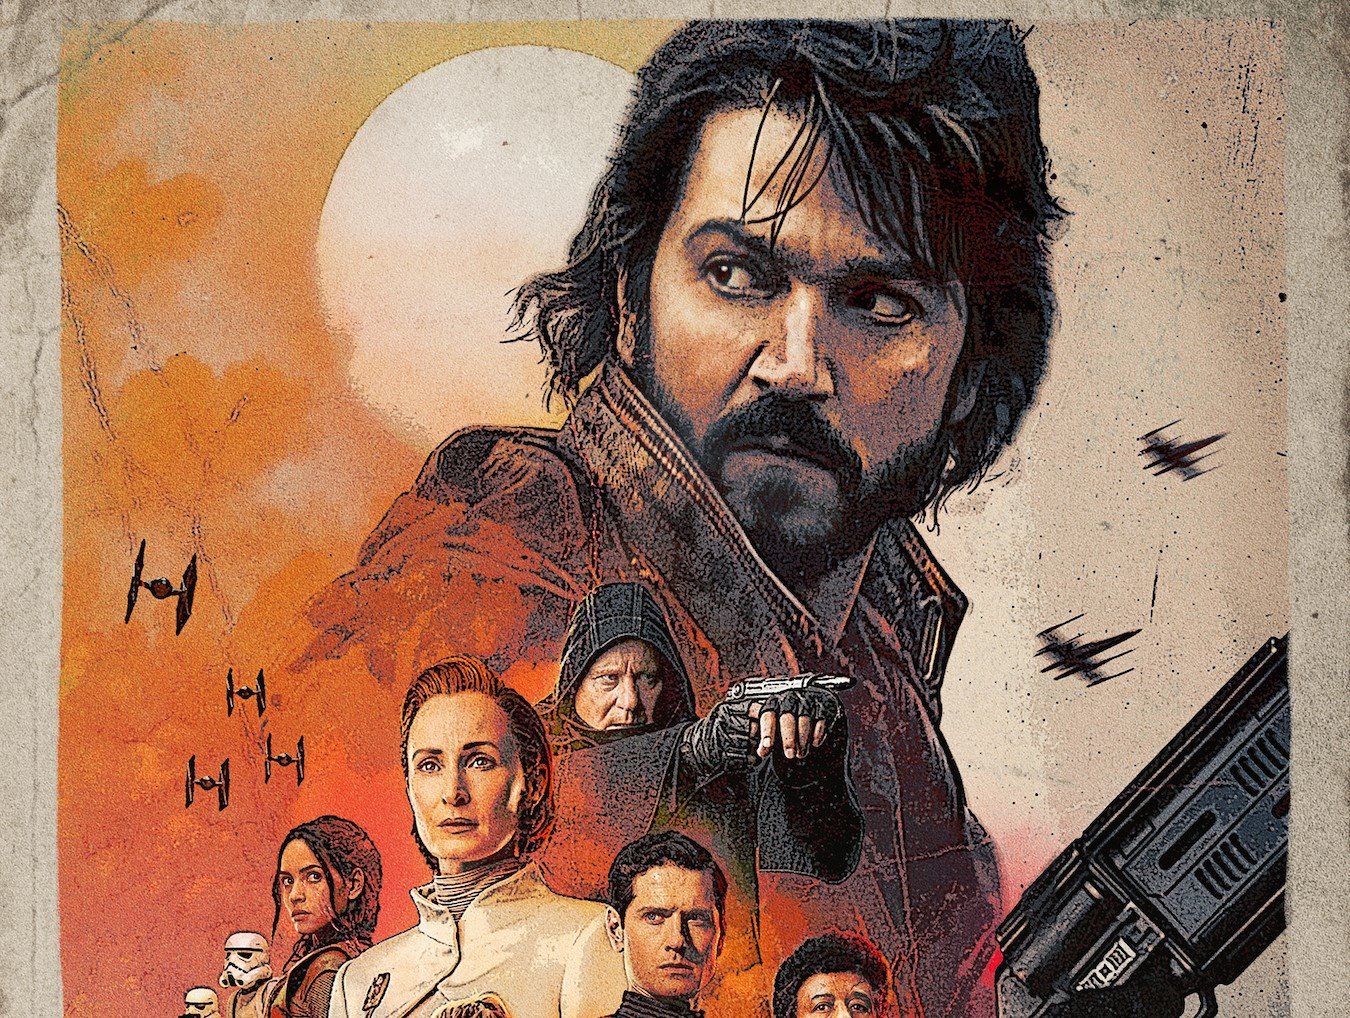 ‘Andor’: Where Does the Show Fall on the ‘Star Wars’ Timeline?